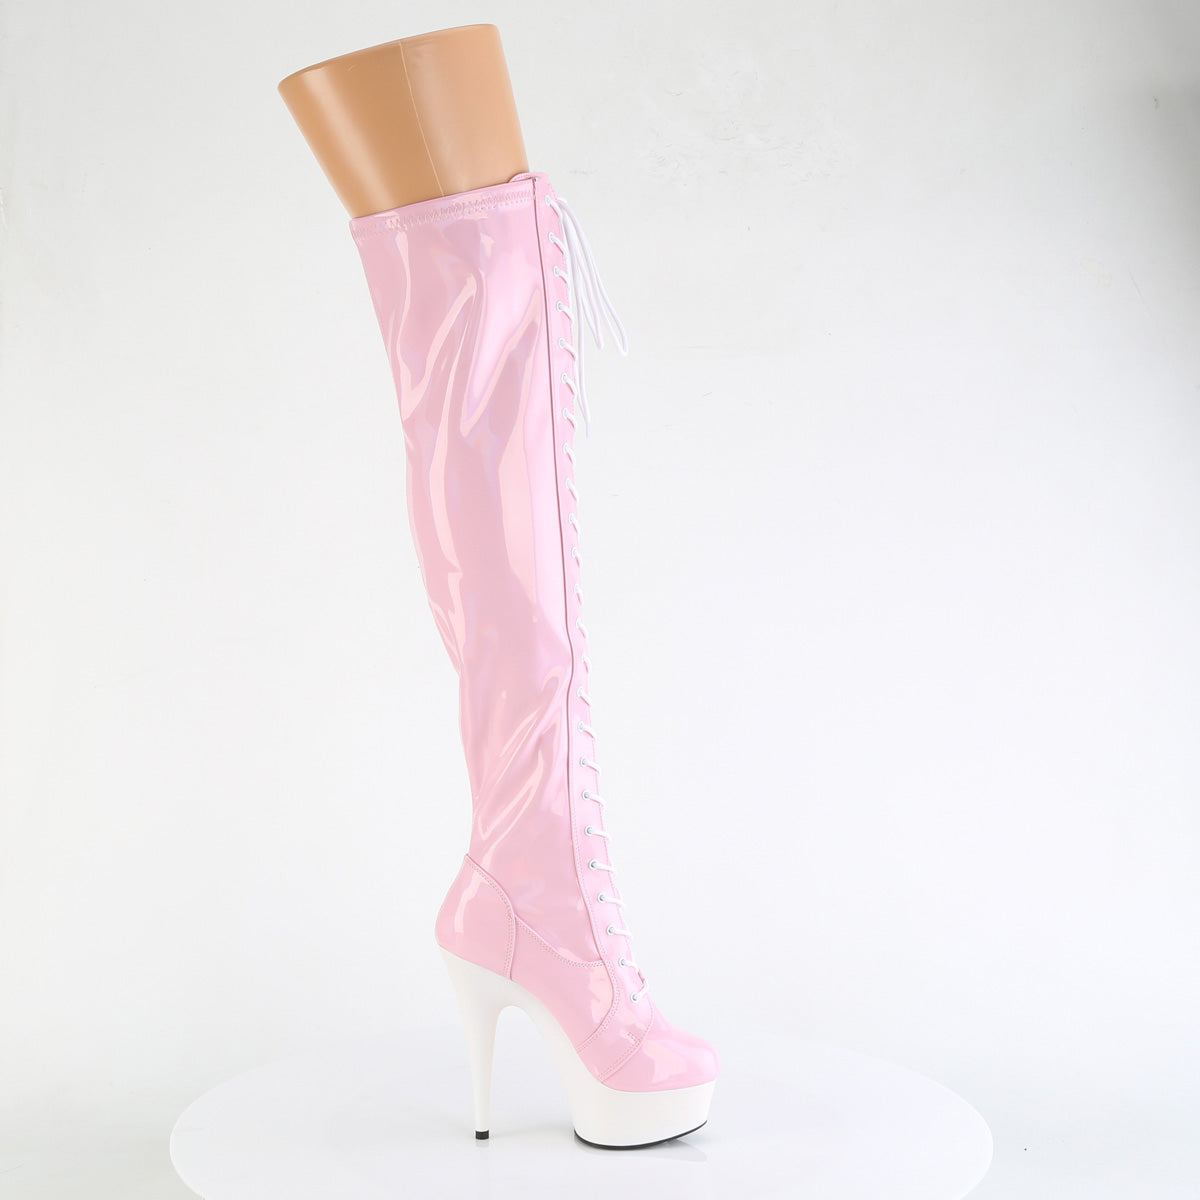 DELIGHT-3029 Pleaser B Pink Stretch Hologram Patent/White Matte Platform Shoes [Thigh High Boots]